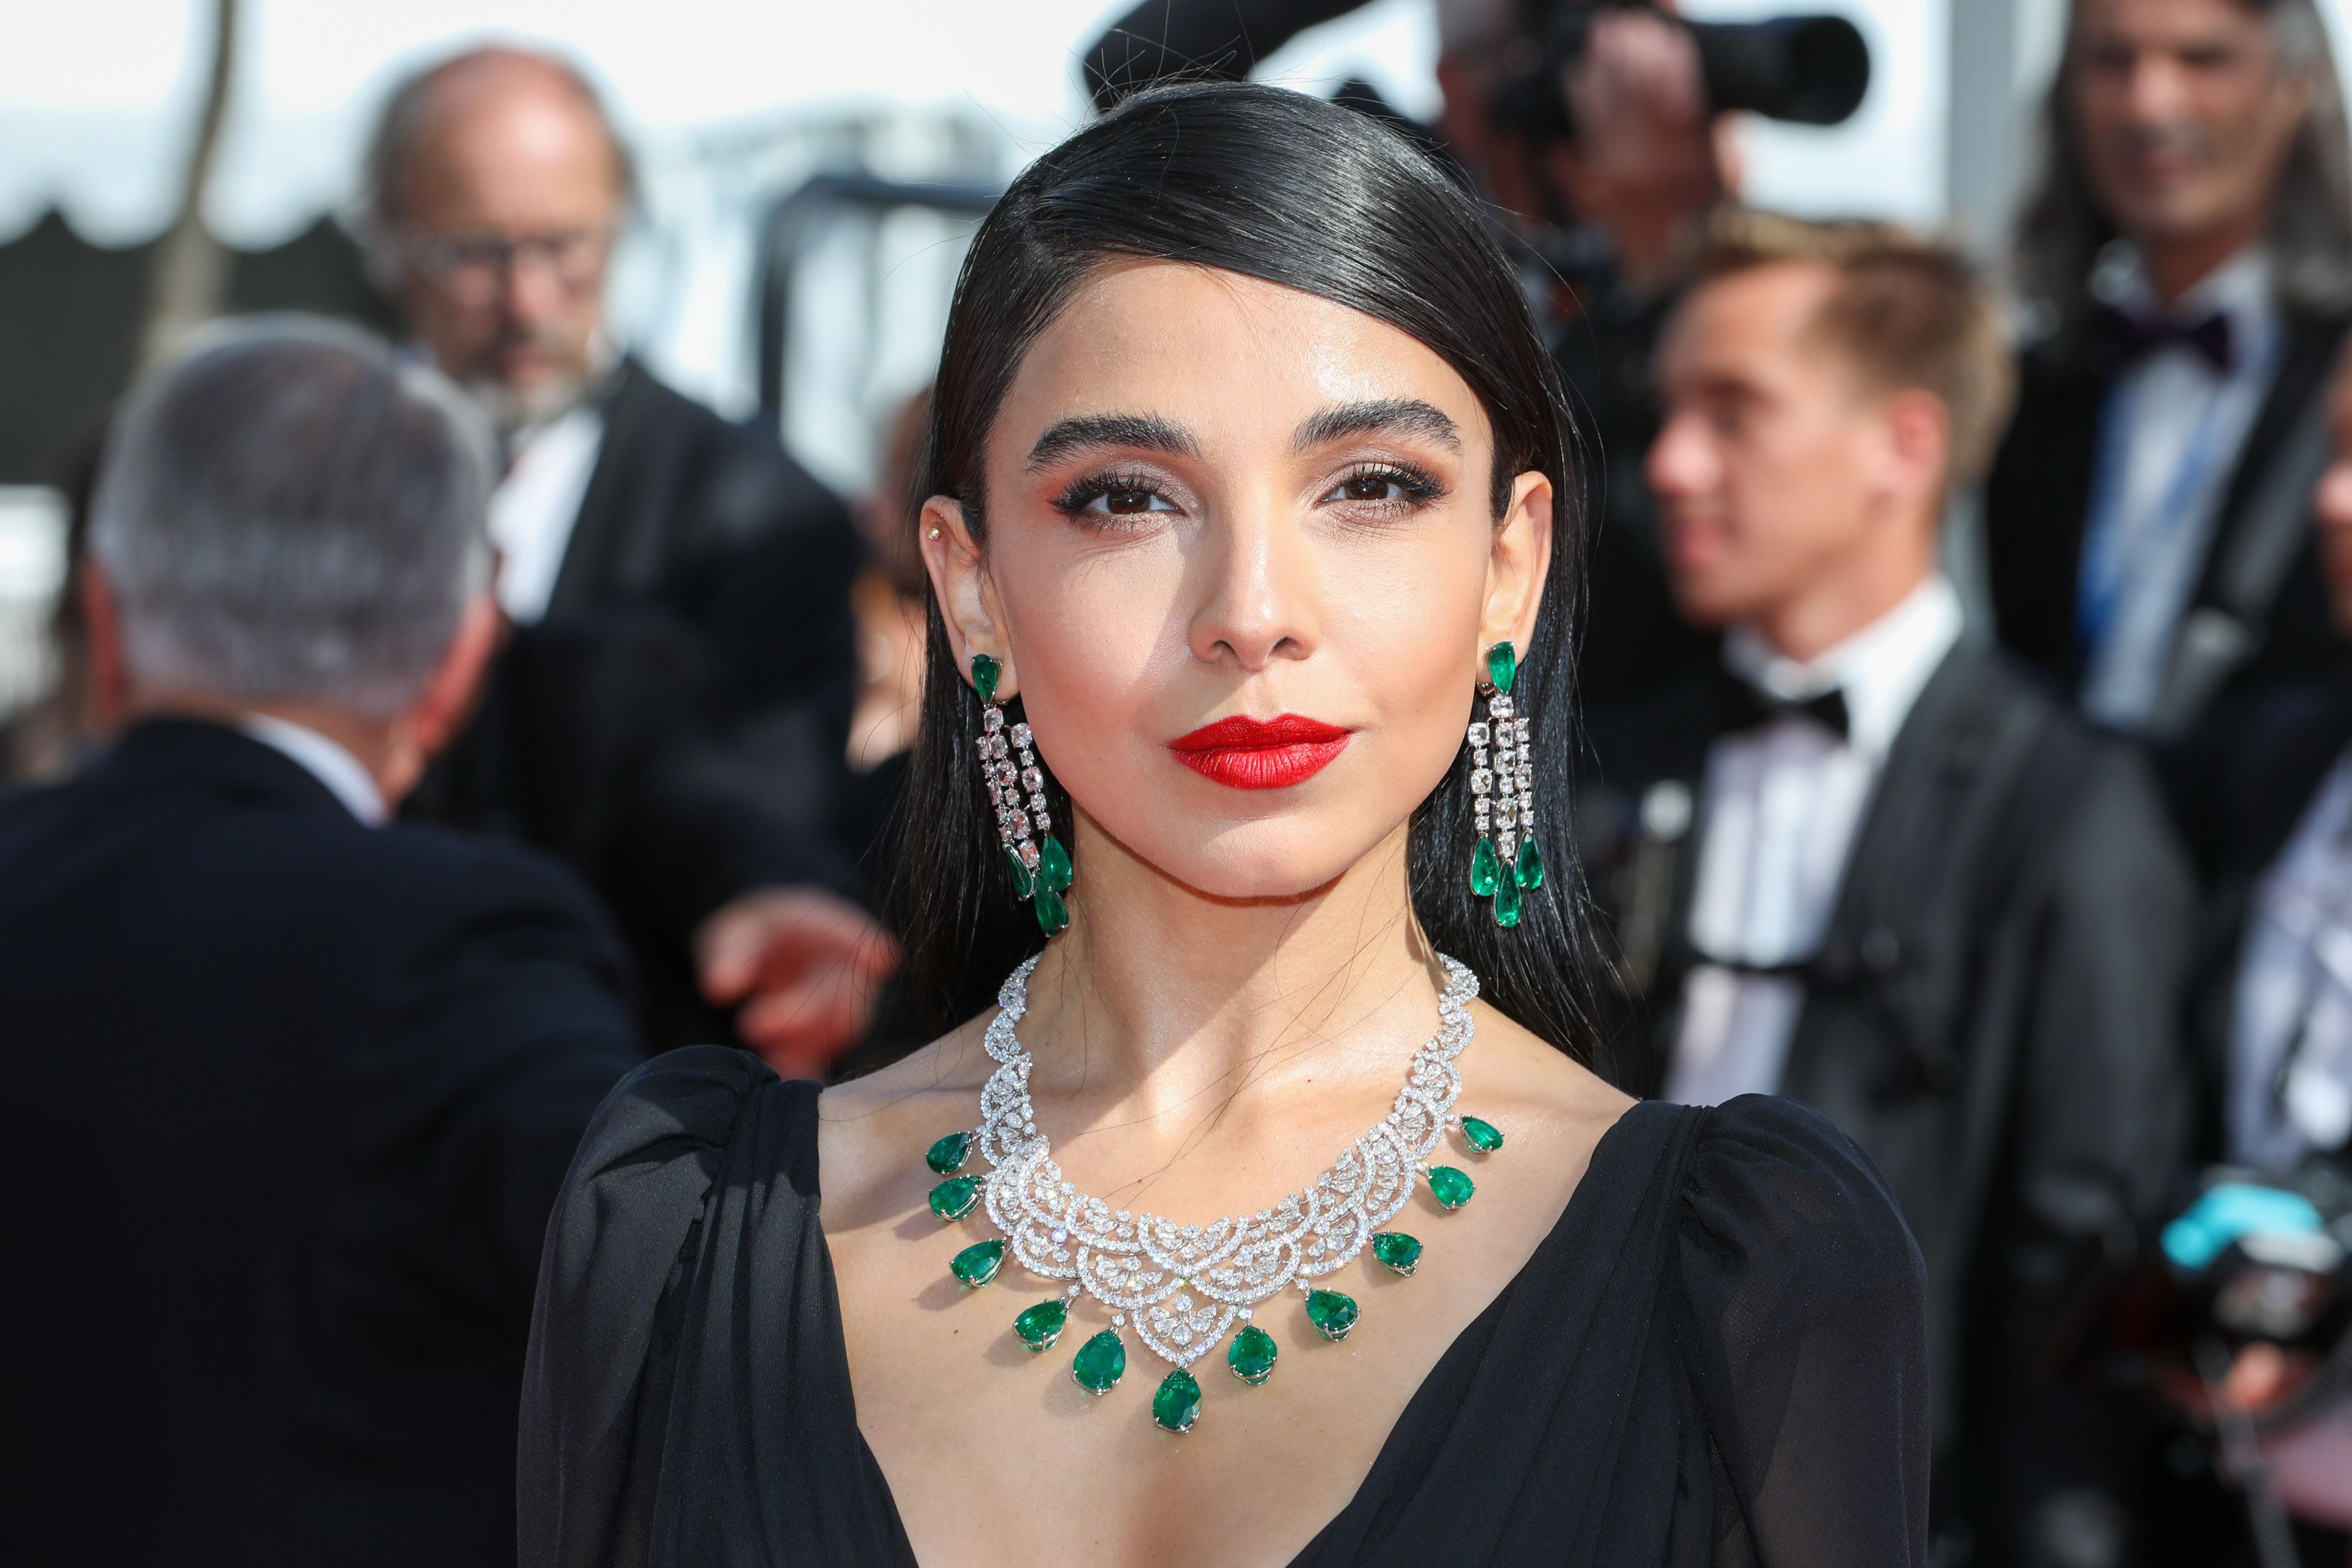 The Blockbuster Jewels at Cannes